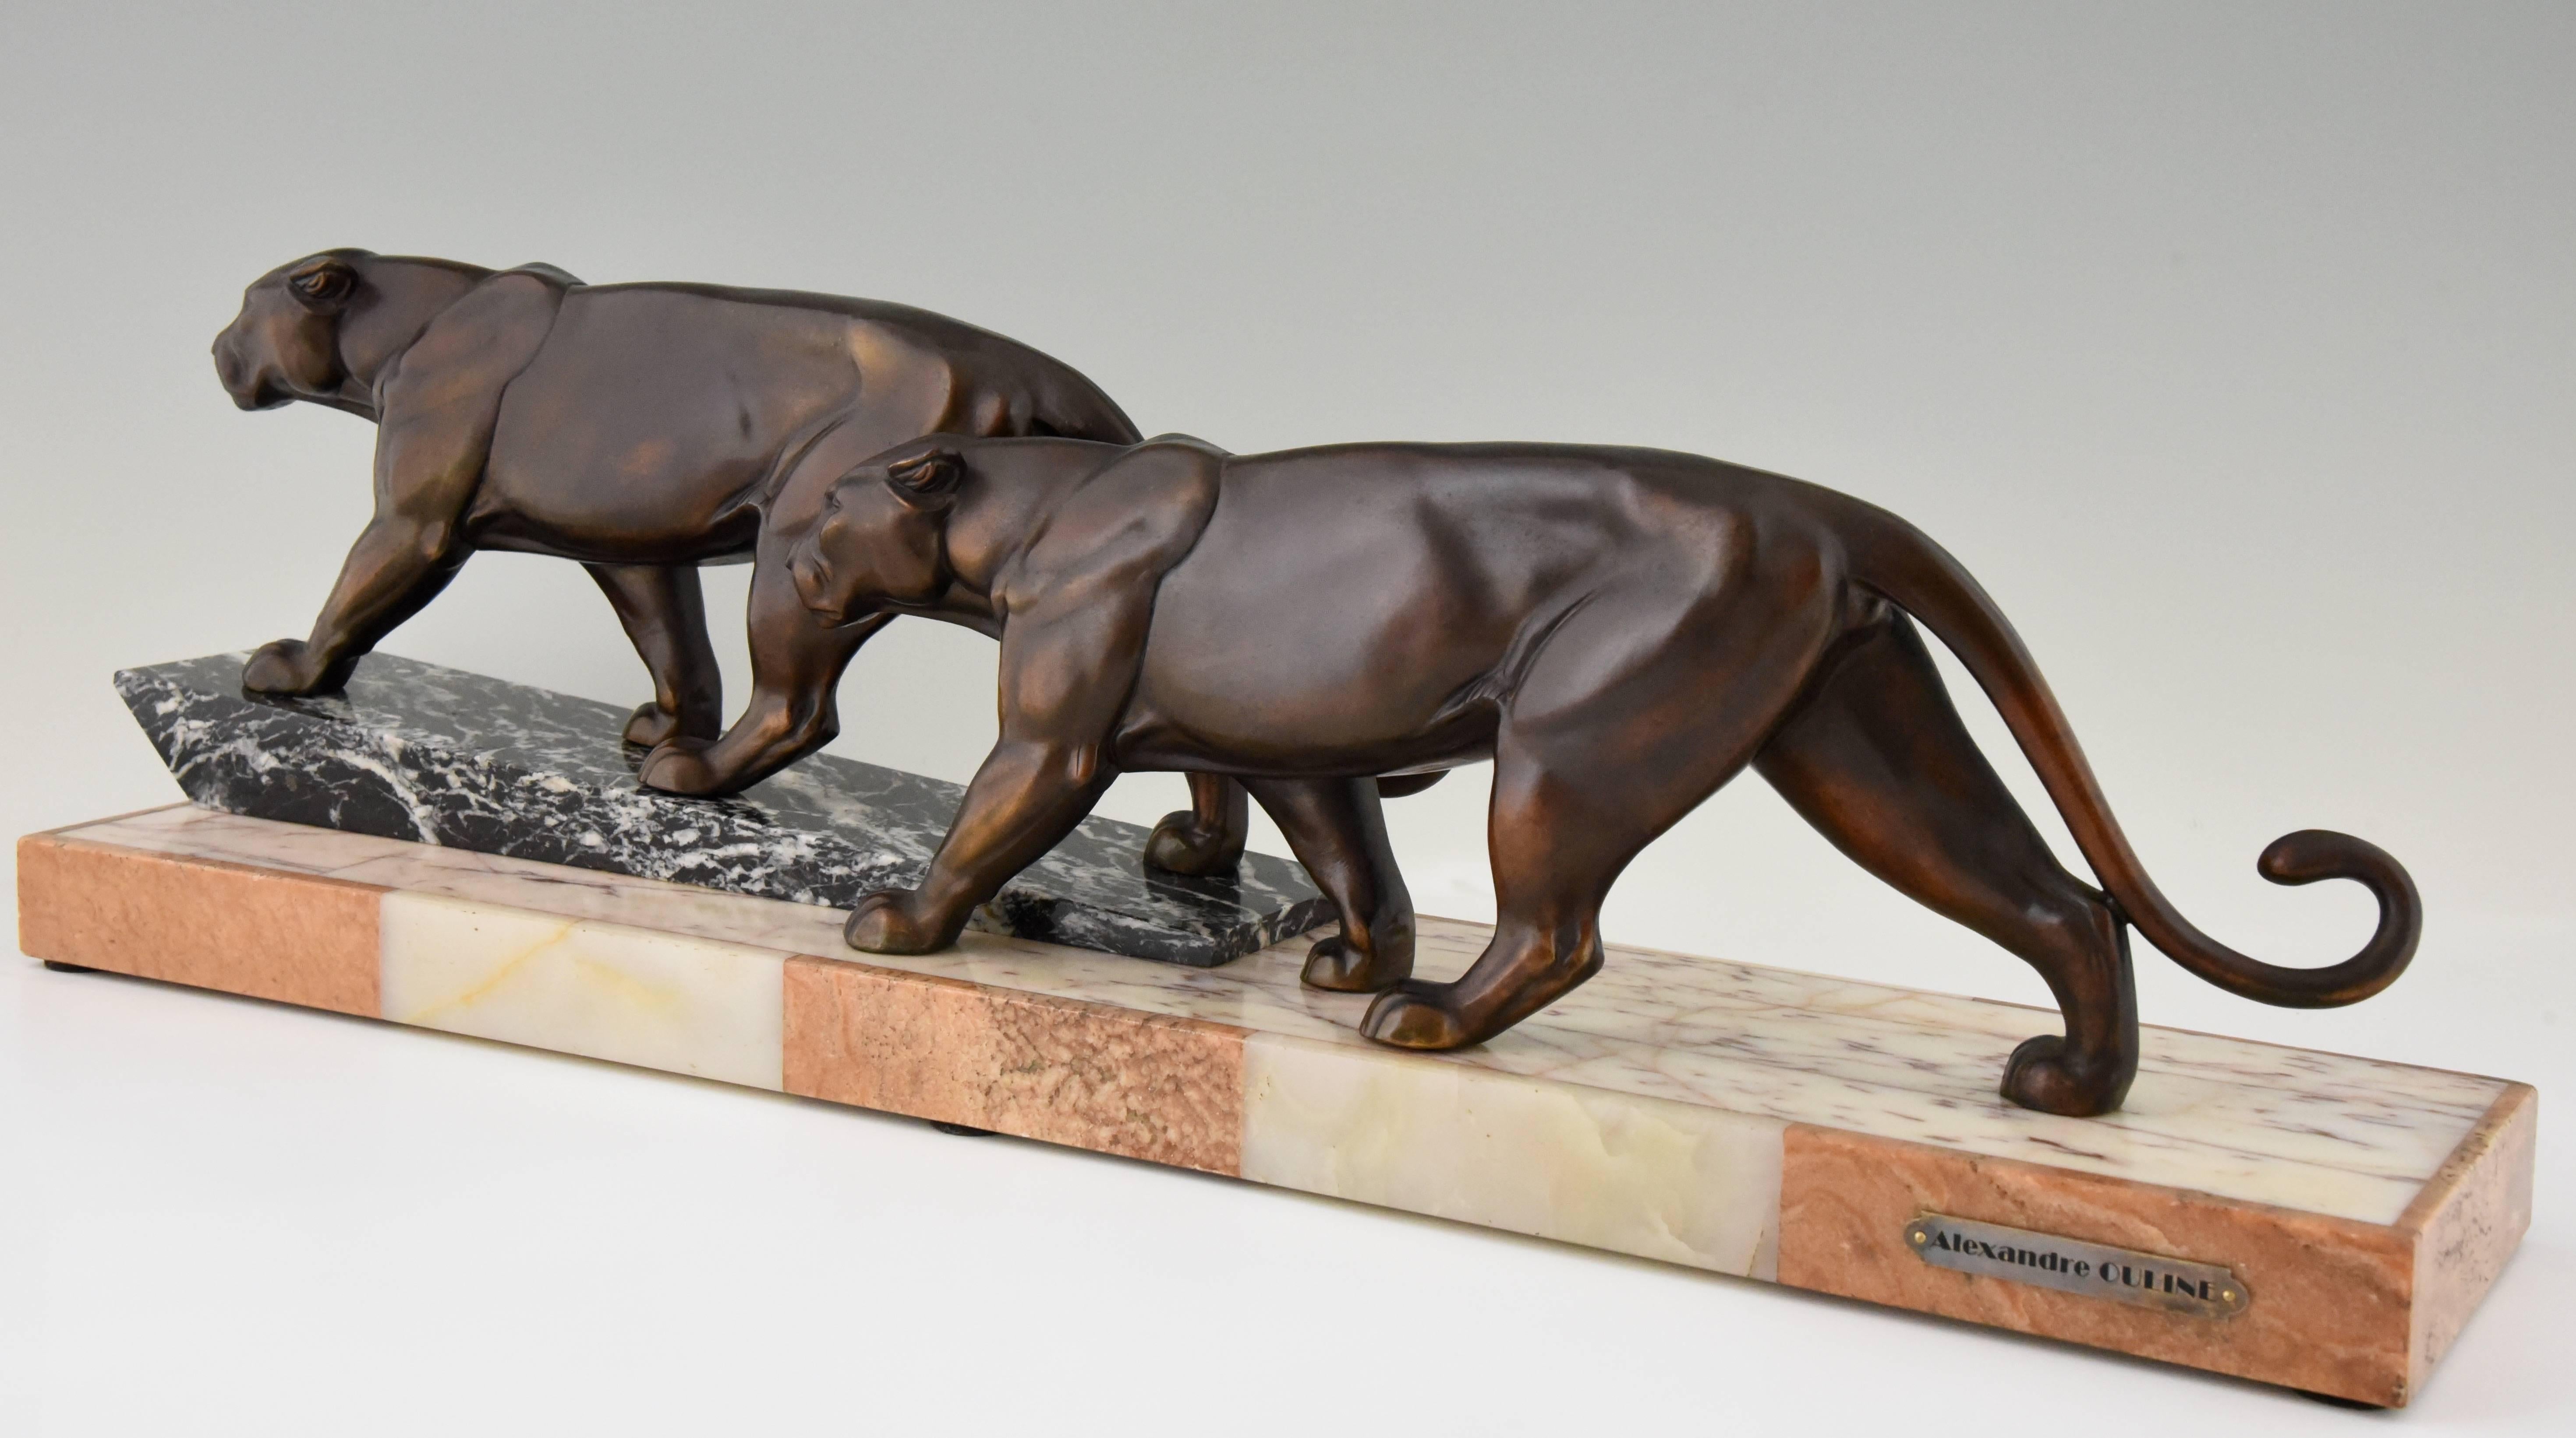 French Art Deco sculpture of two walking panthers on marble base. 
Signature / marks: Alexandre Ouline.
Style: Art Deco.
Date: 1925
Material: Art metal, brown patina with shades. Marble base with onyx inlay.
Origin: France
Size: L. 71.5 cm. x